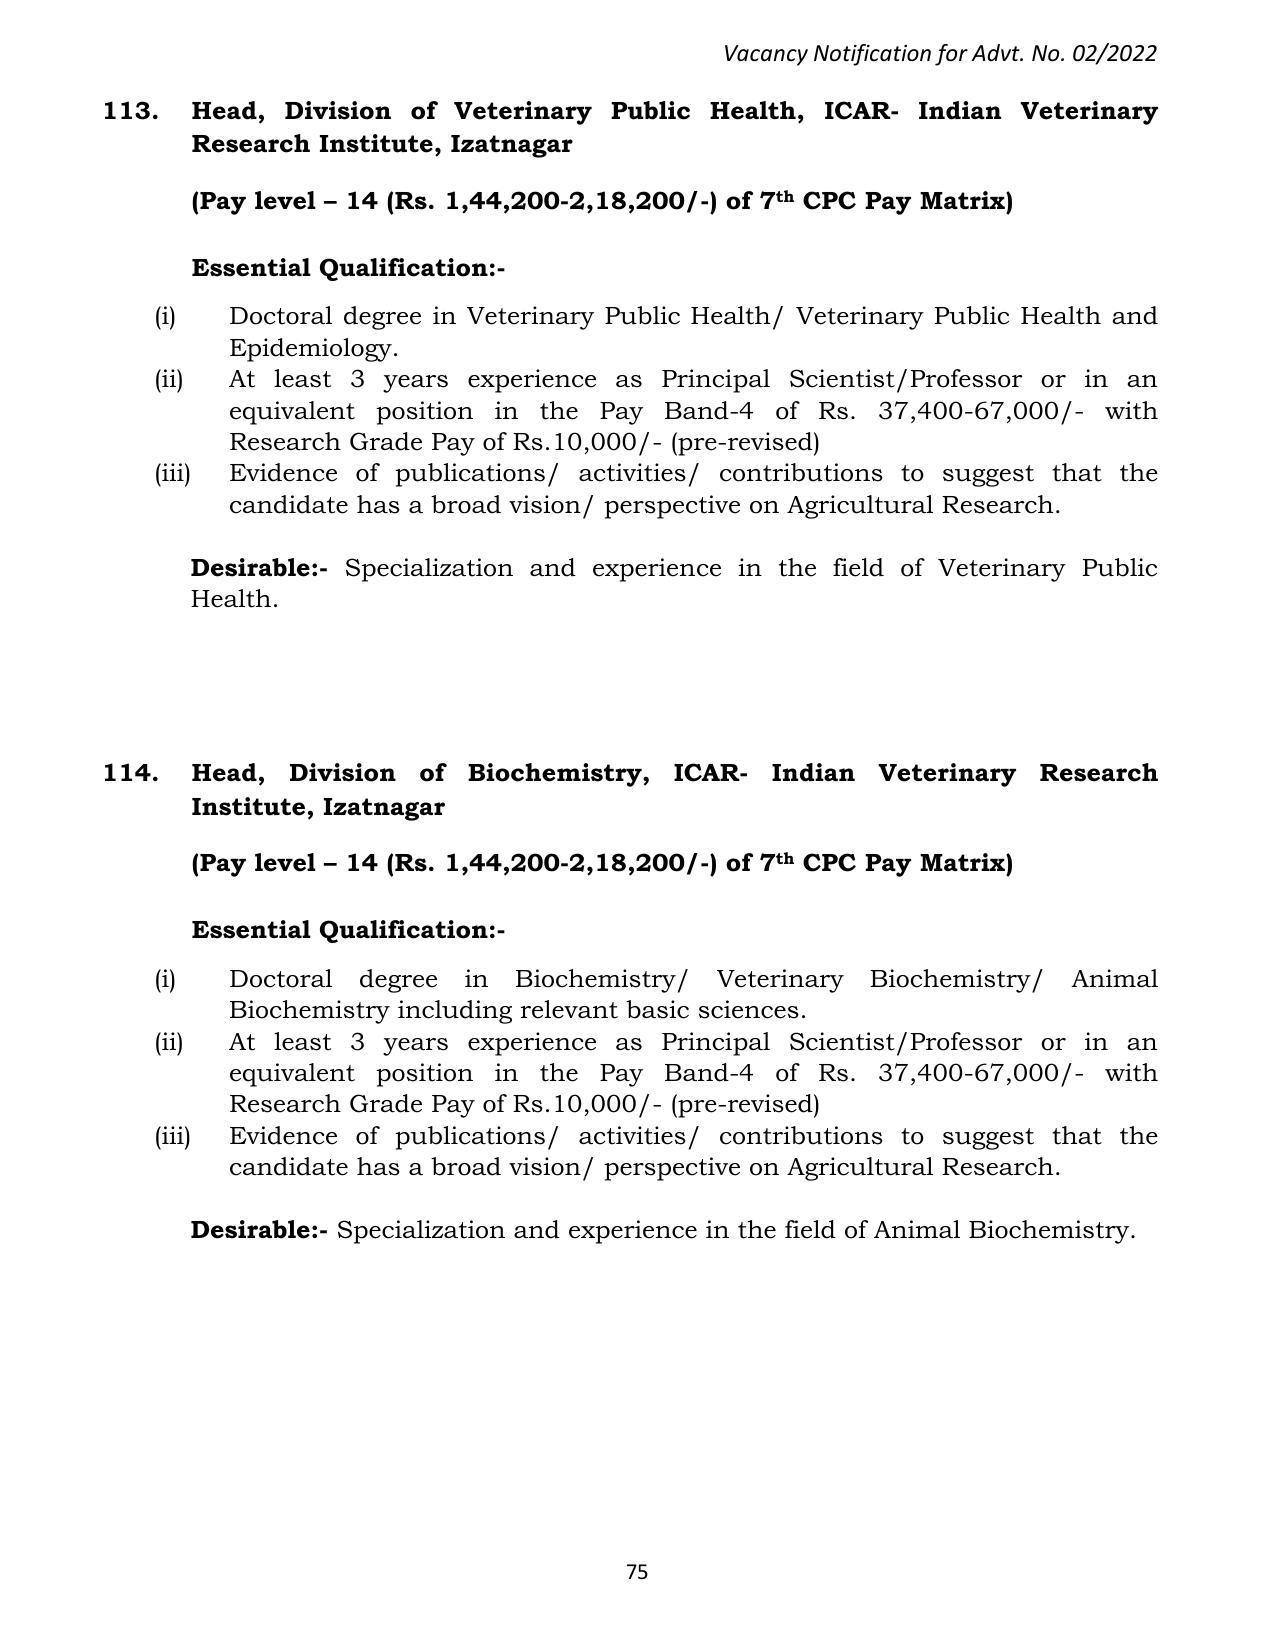 ASRB Non-Research Management Recruitment 2022 - Page 129